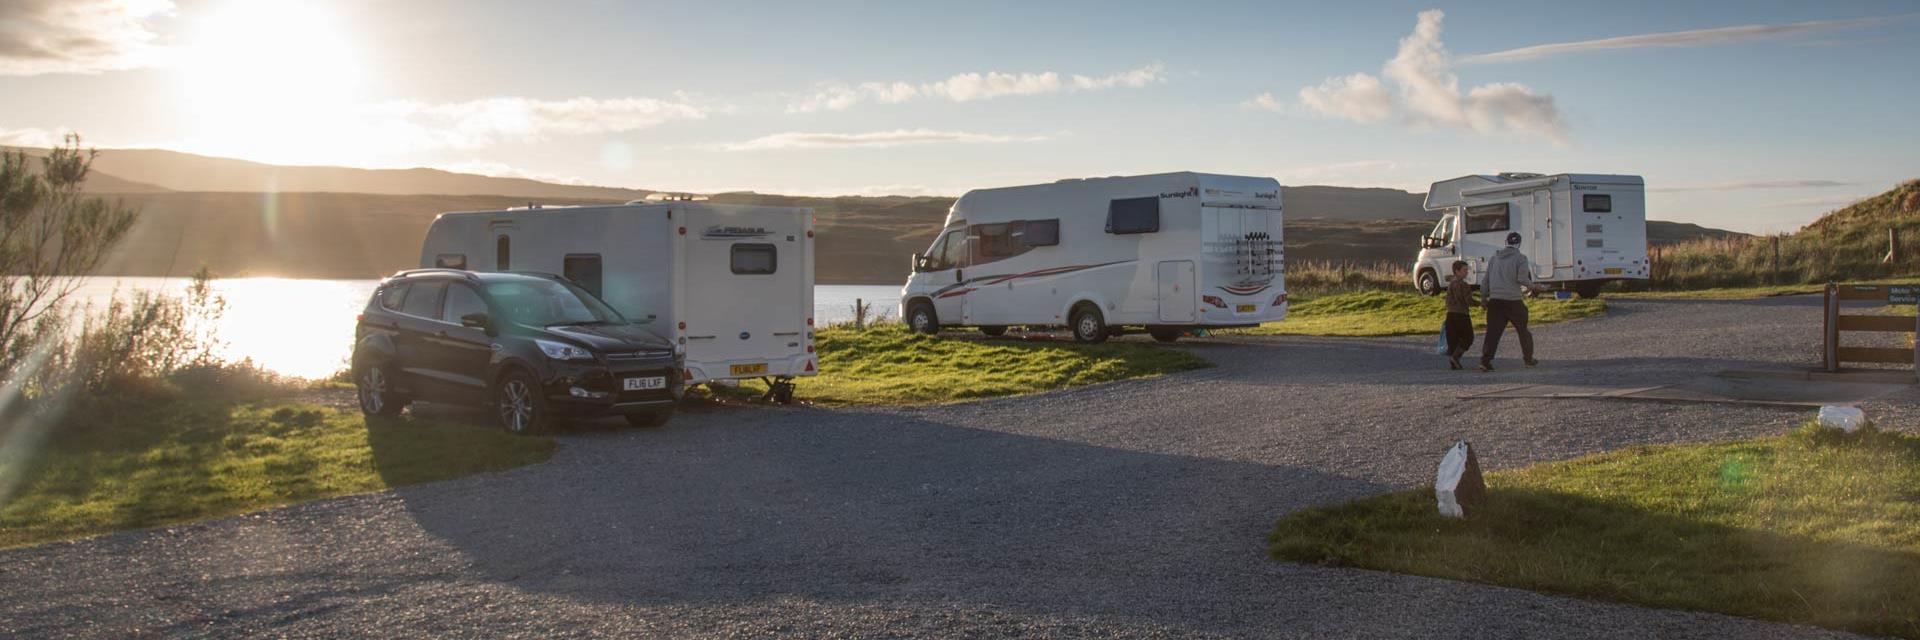 Motorhomes pitched up on Skye campsite 